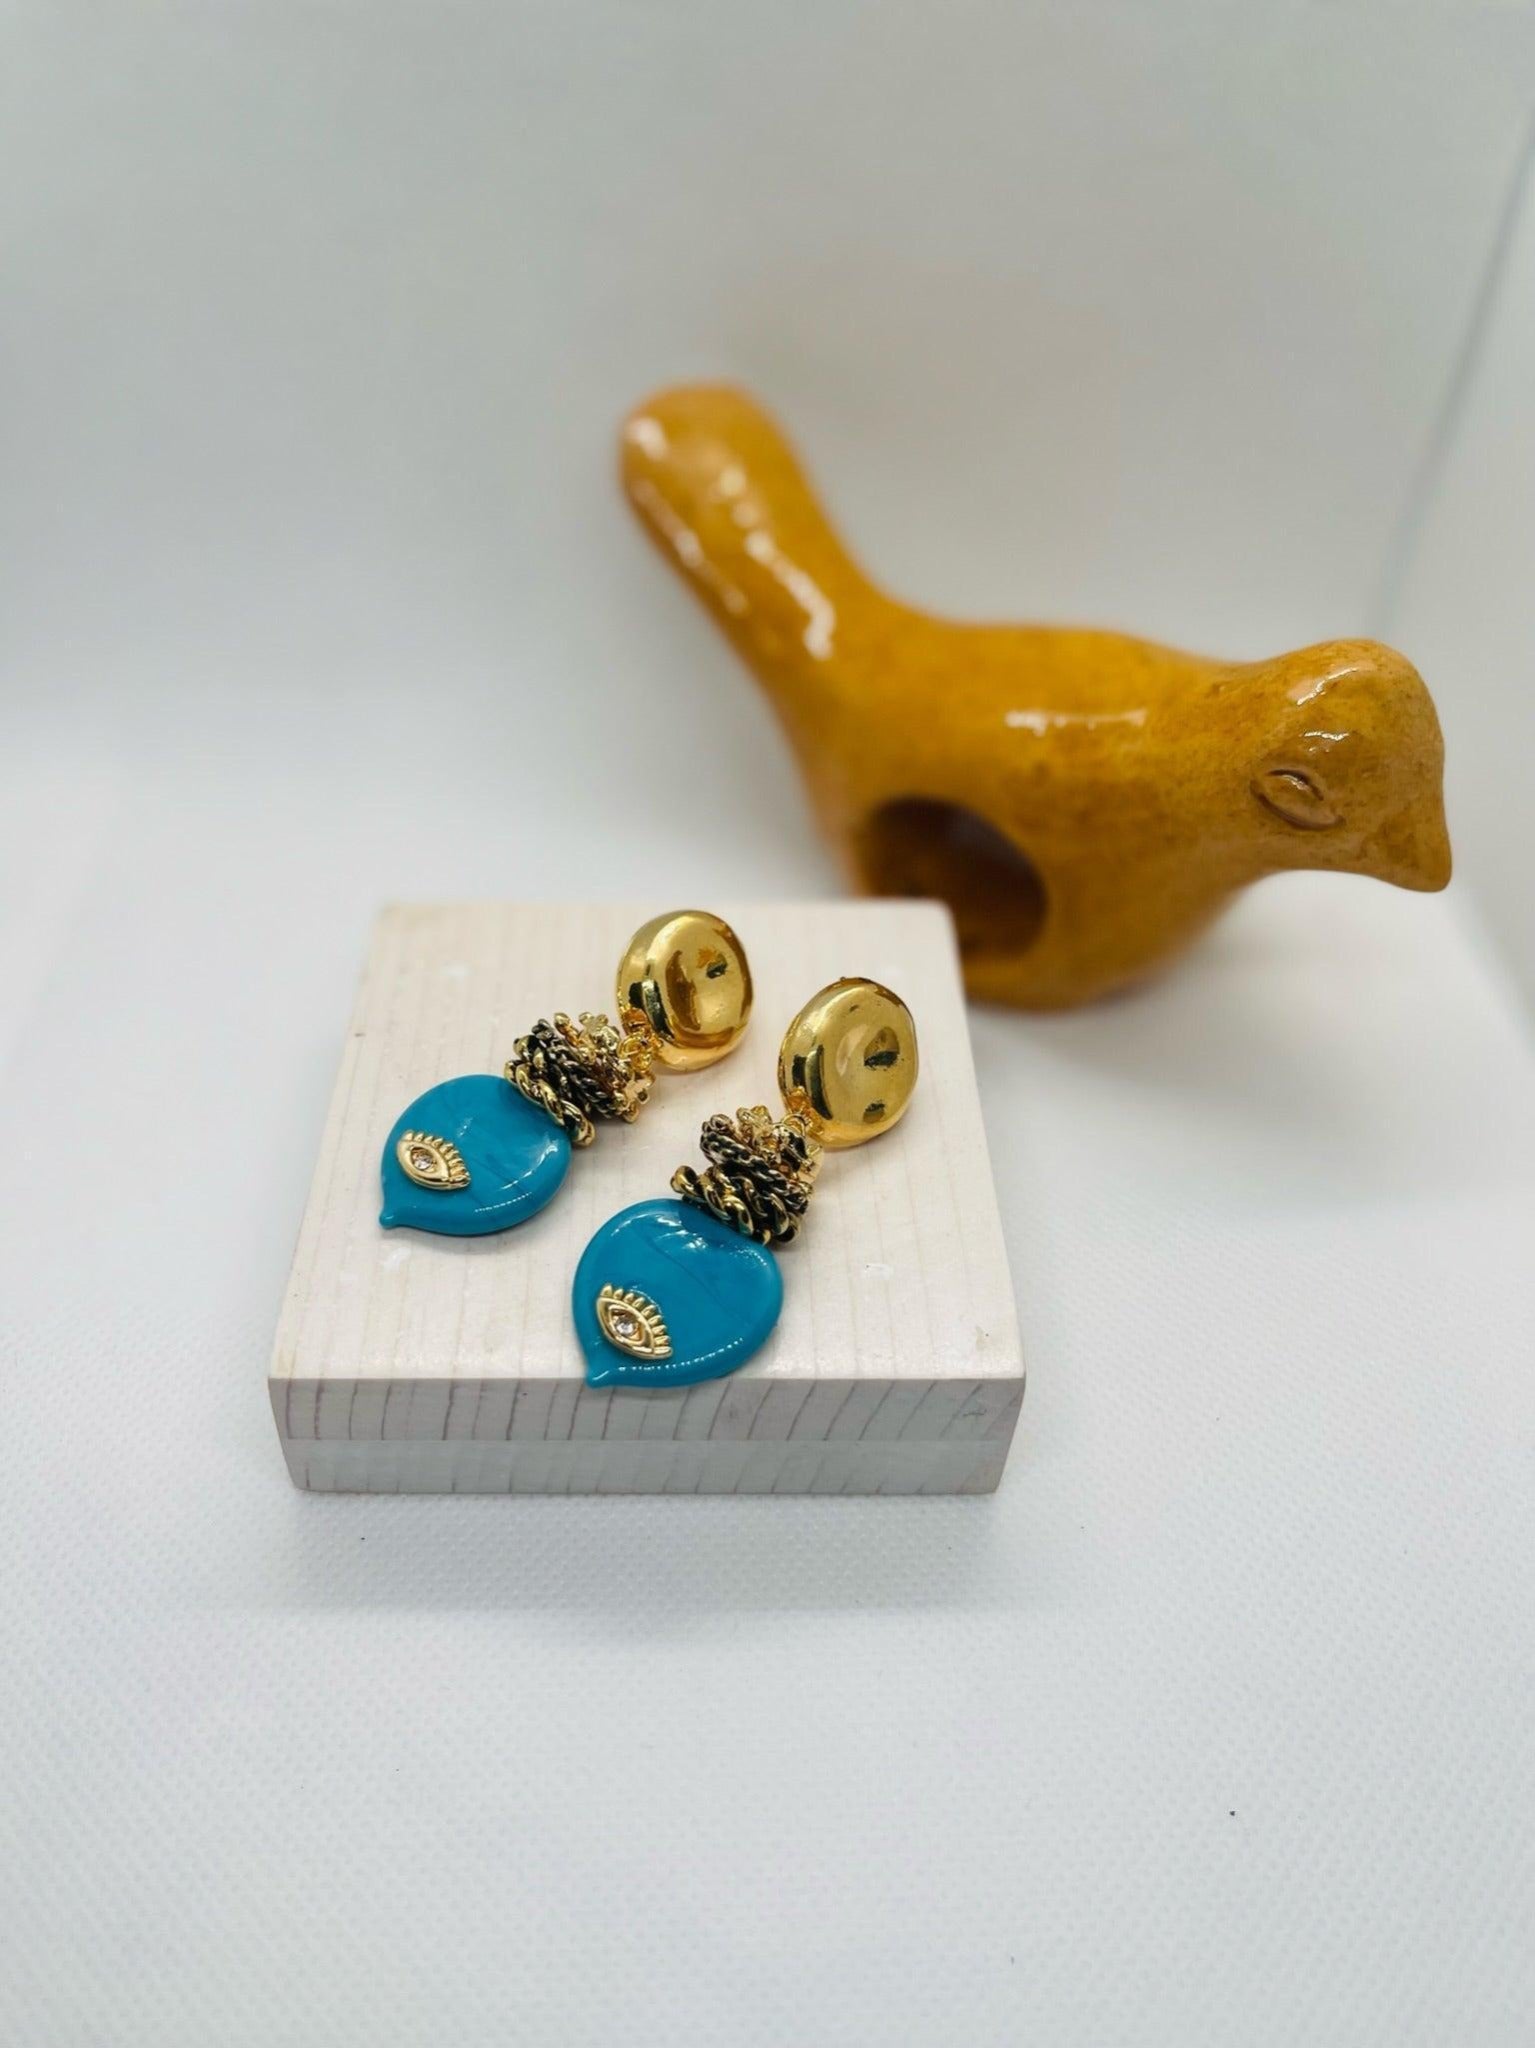 My Eye on You Murano Glass Earrings | Penelope Made This